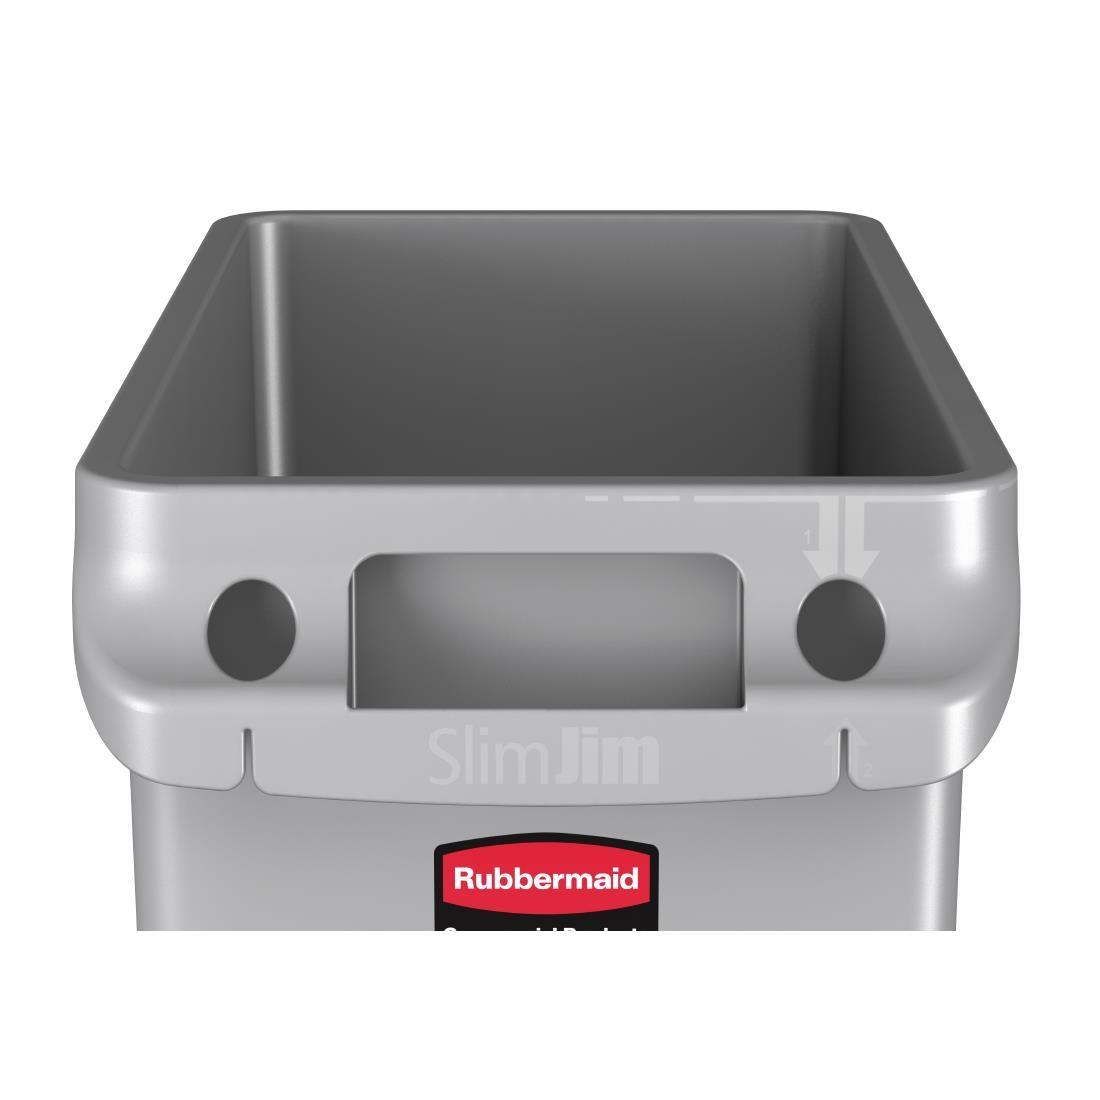 Rubbermaid Slim Jim Container With Venting Channels Grey 60Ltr - F603  - 8